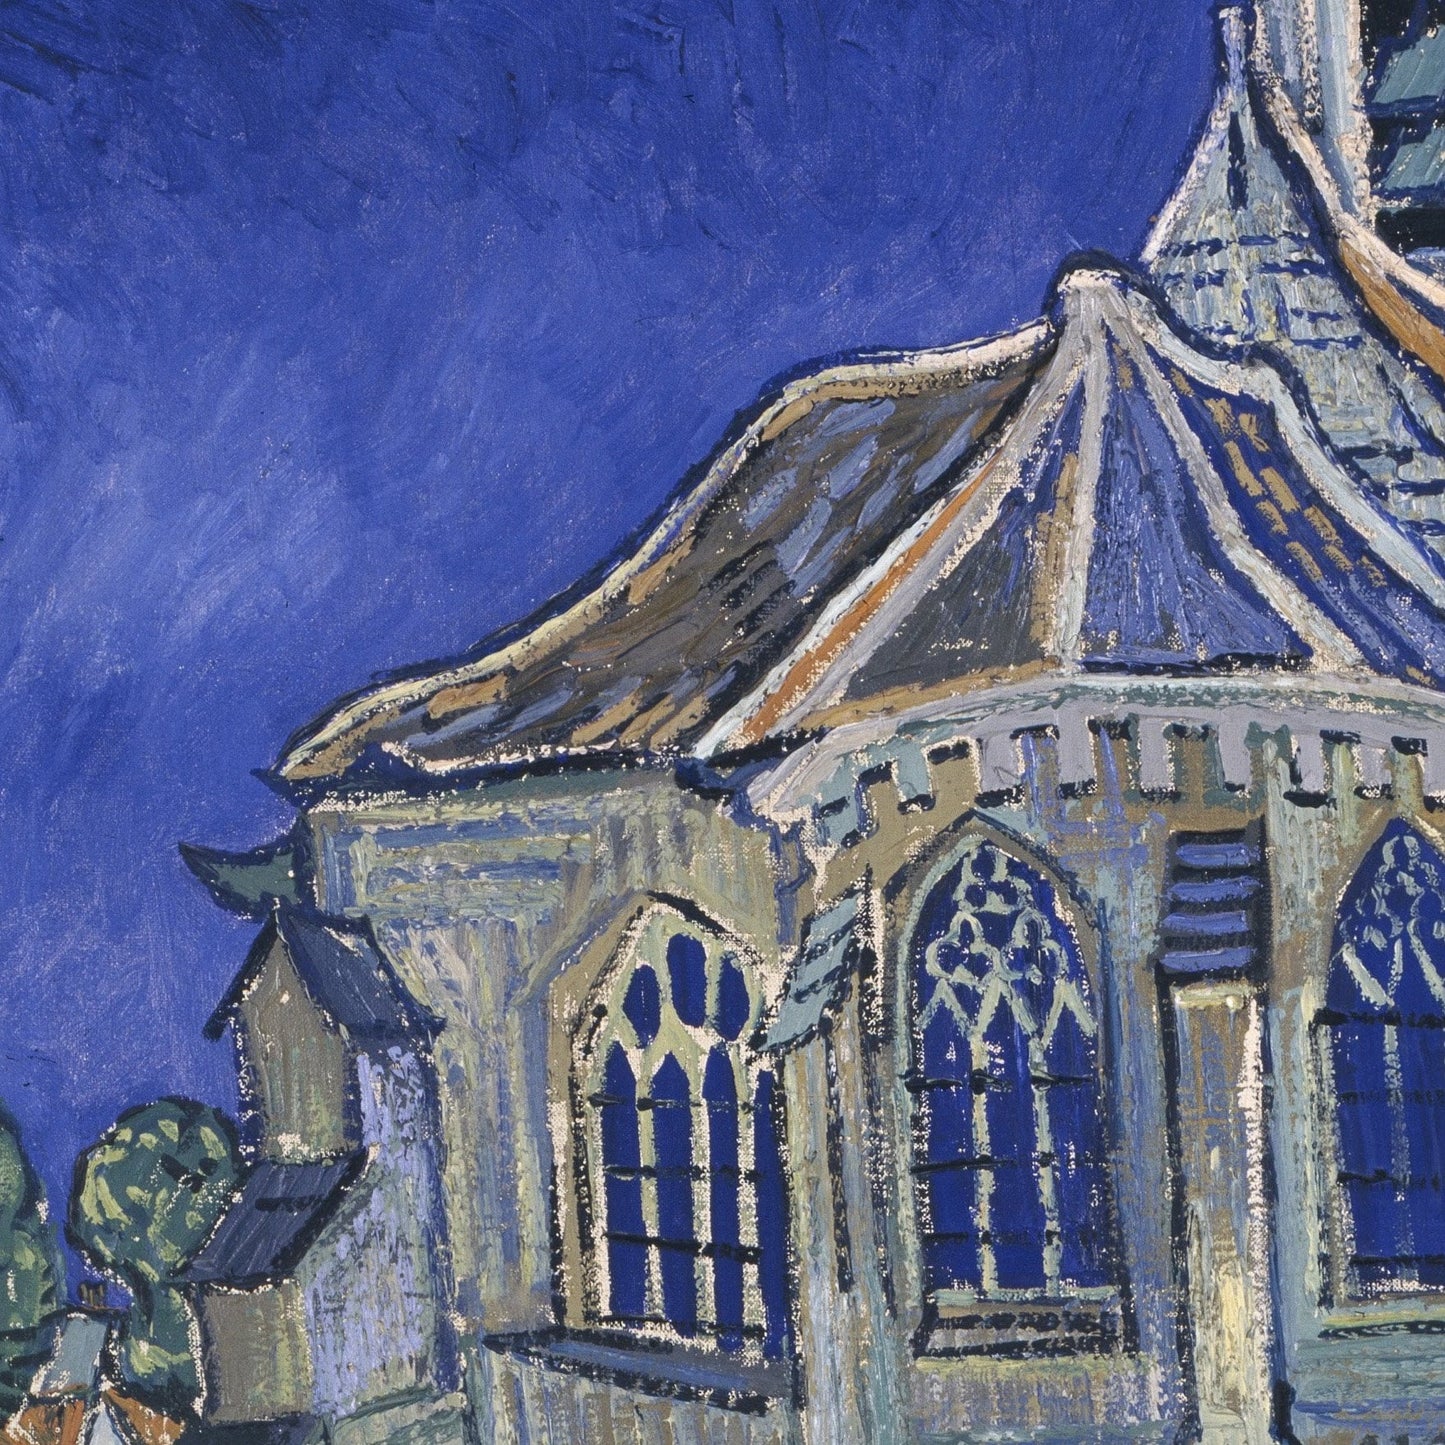 The Church in Auverssur by Vincent Van Gogh, 3d Printed with texture and brush strokes looks like original oil-painting, code:123